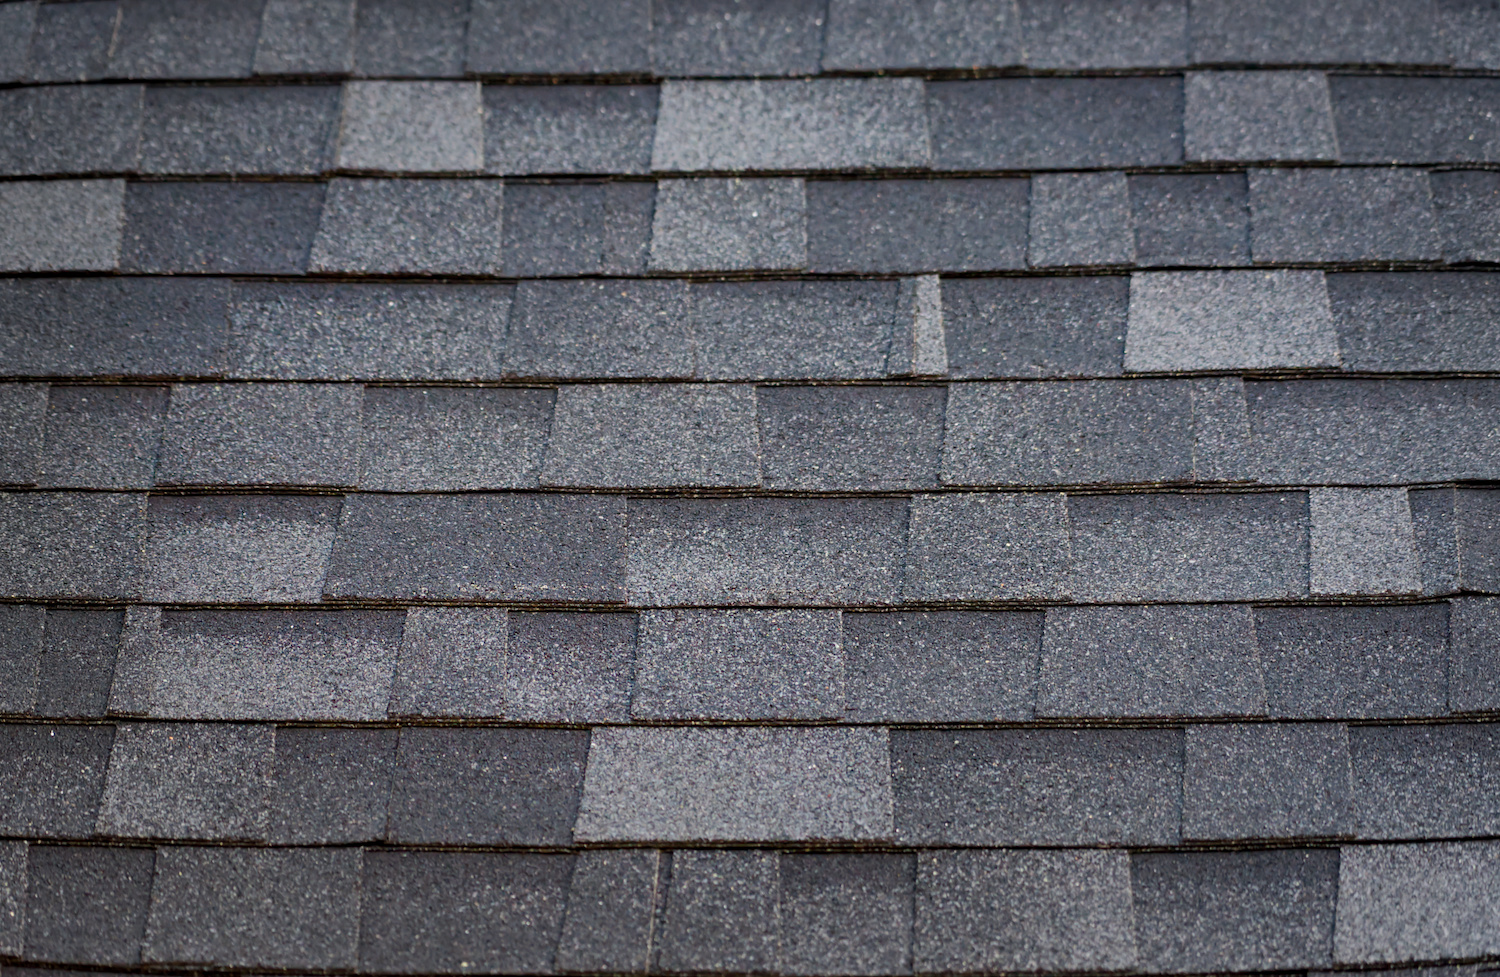 asphalt shingle roof replacement cost shingles